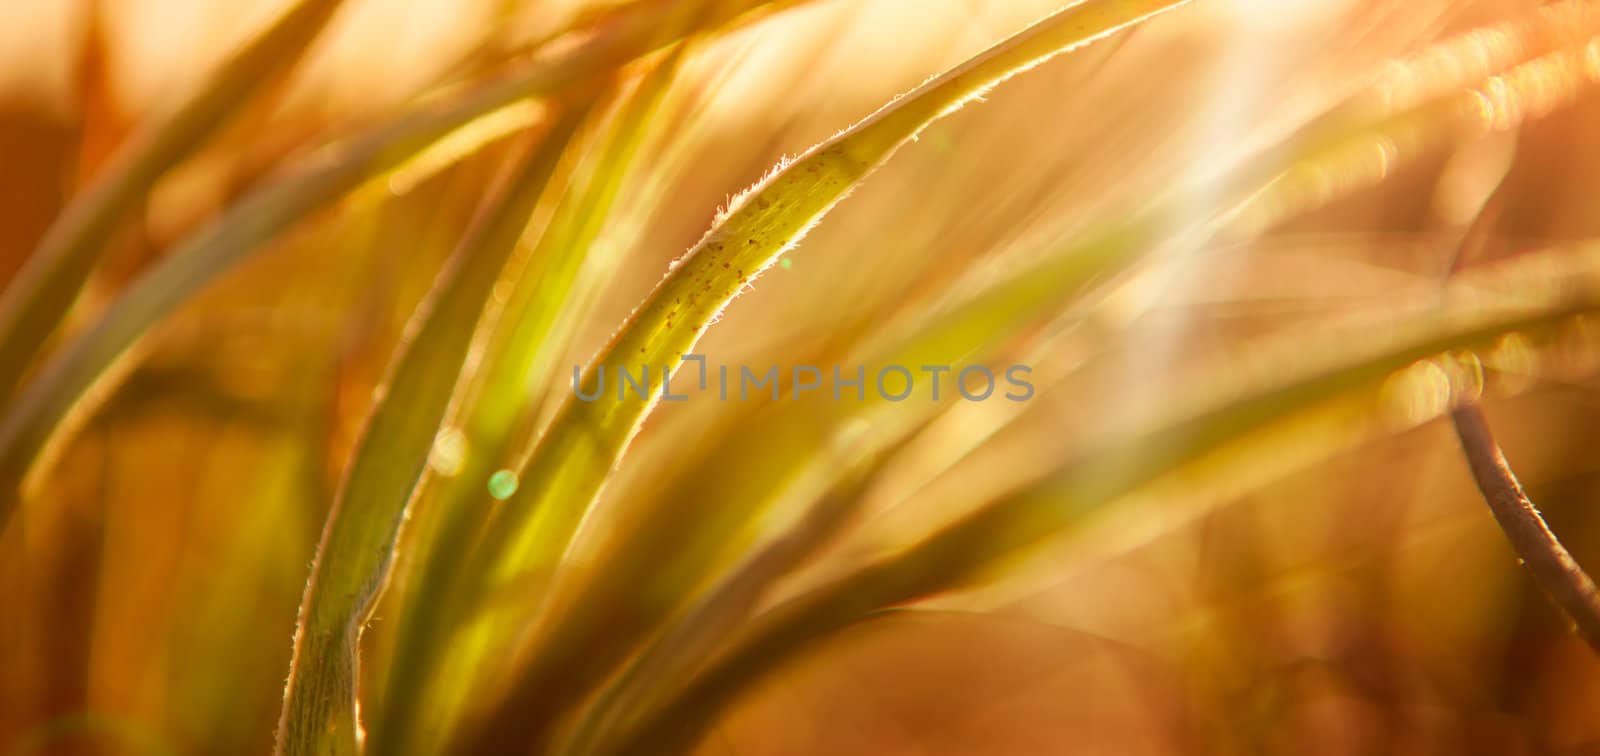 Abstract Grass Background by kwest